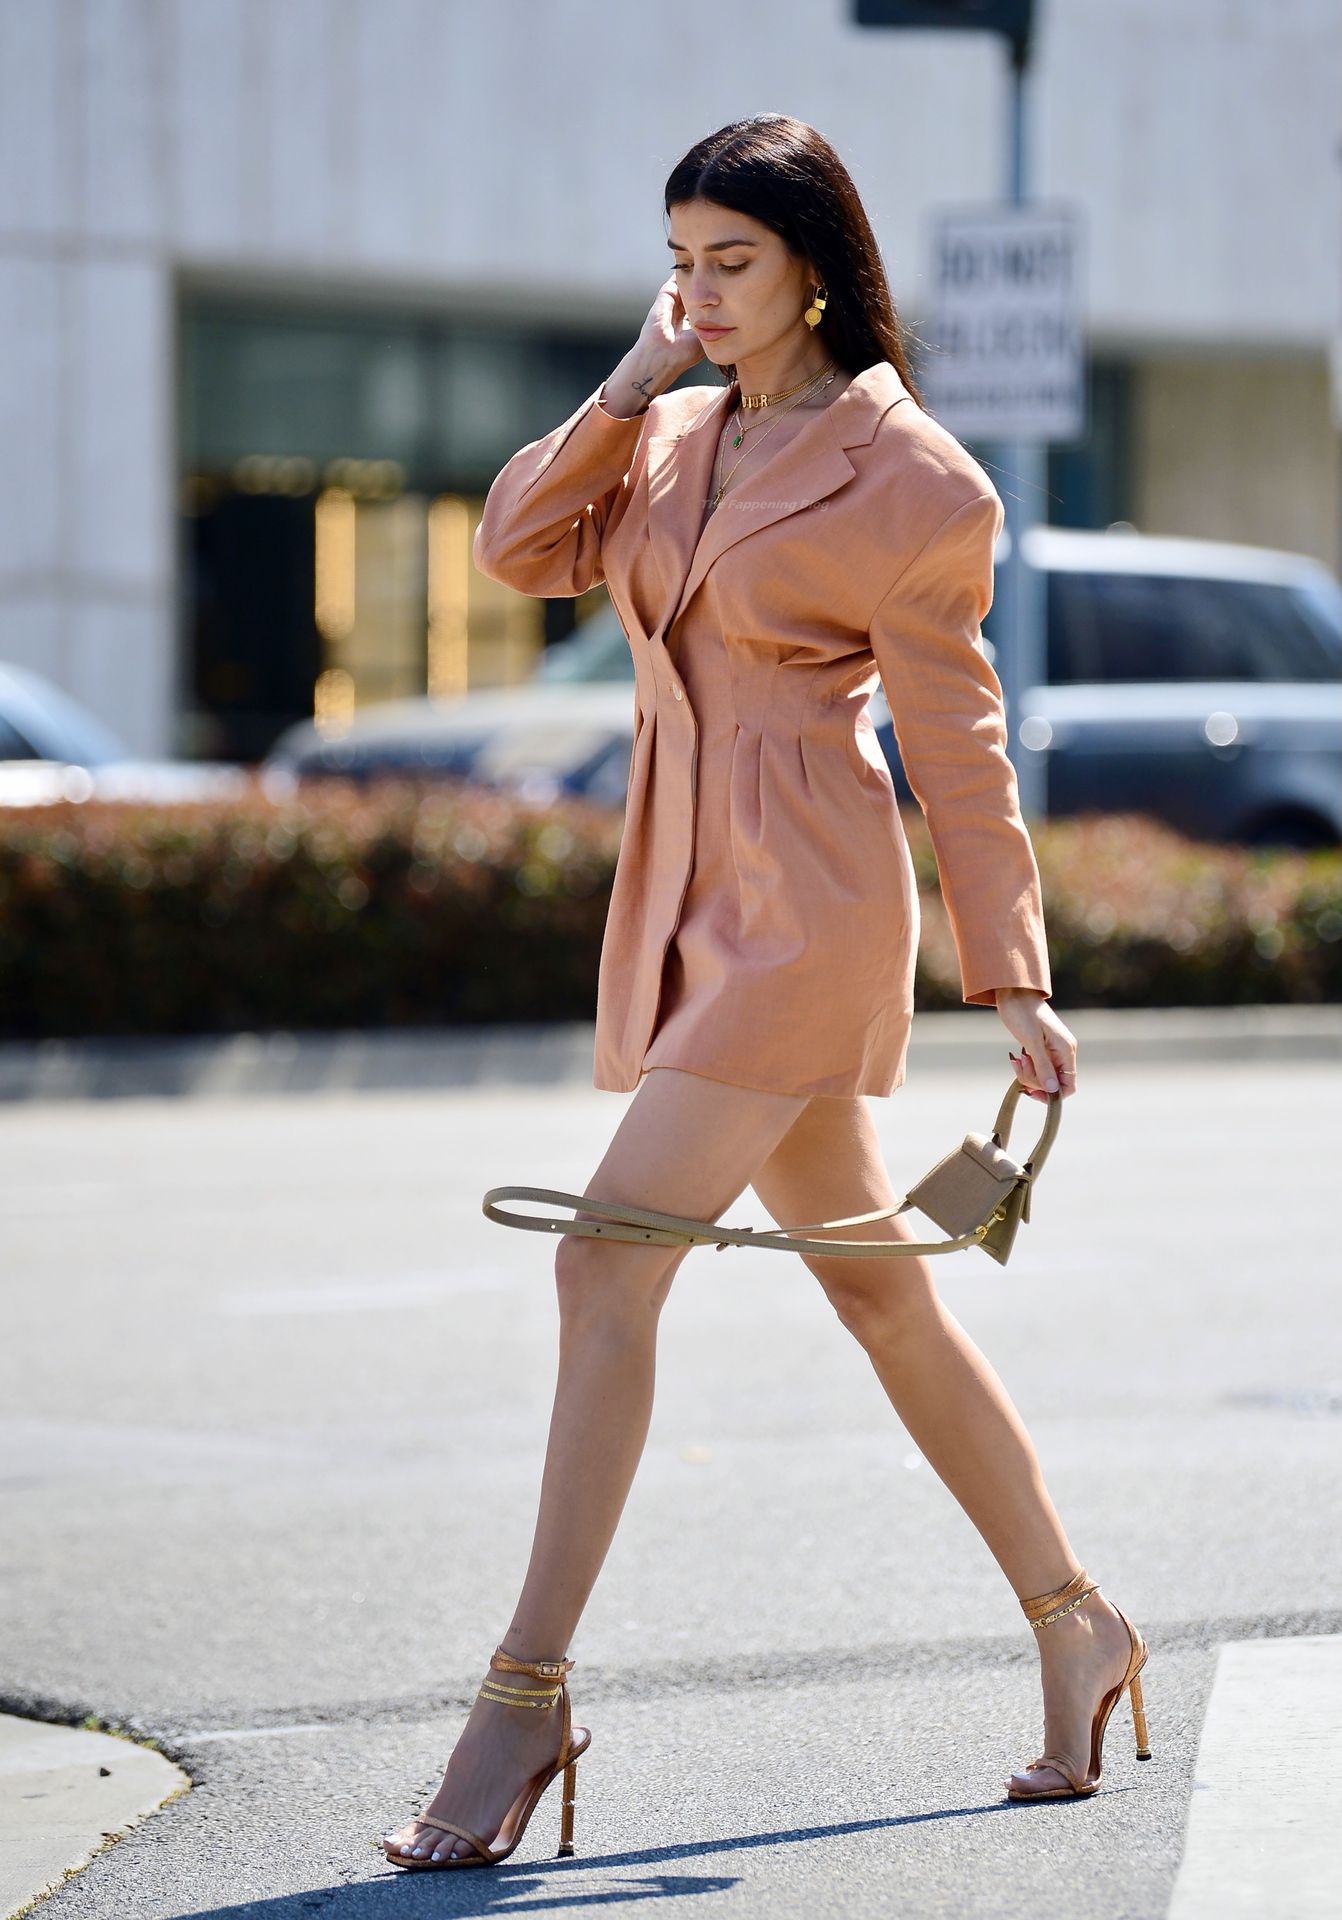 Nicole Williams Displays Her Incredibly Long Legs During A Street Style Shoot (12 Photos)